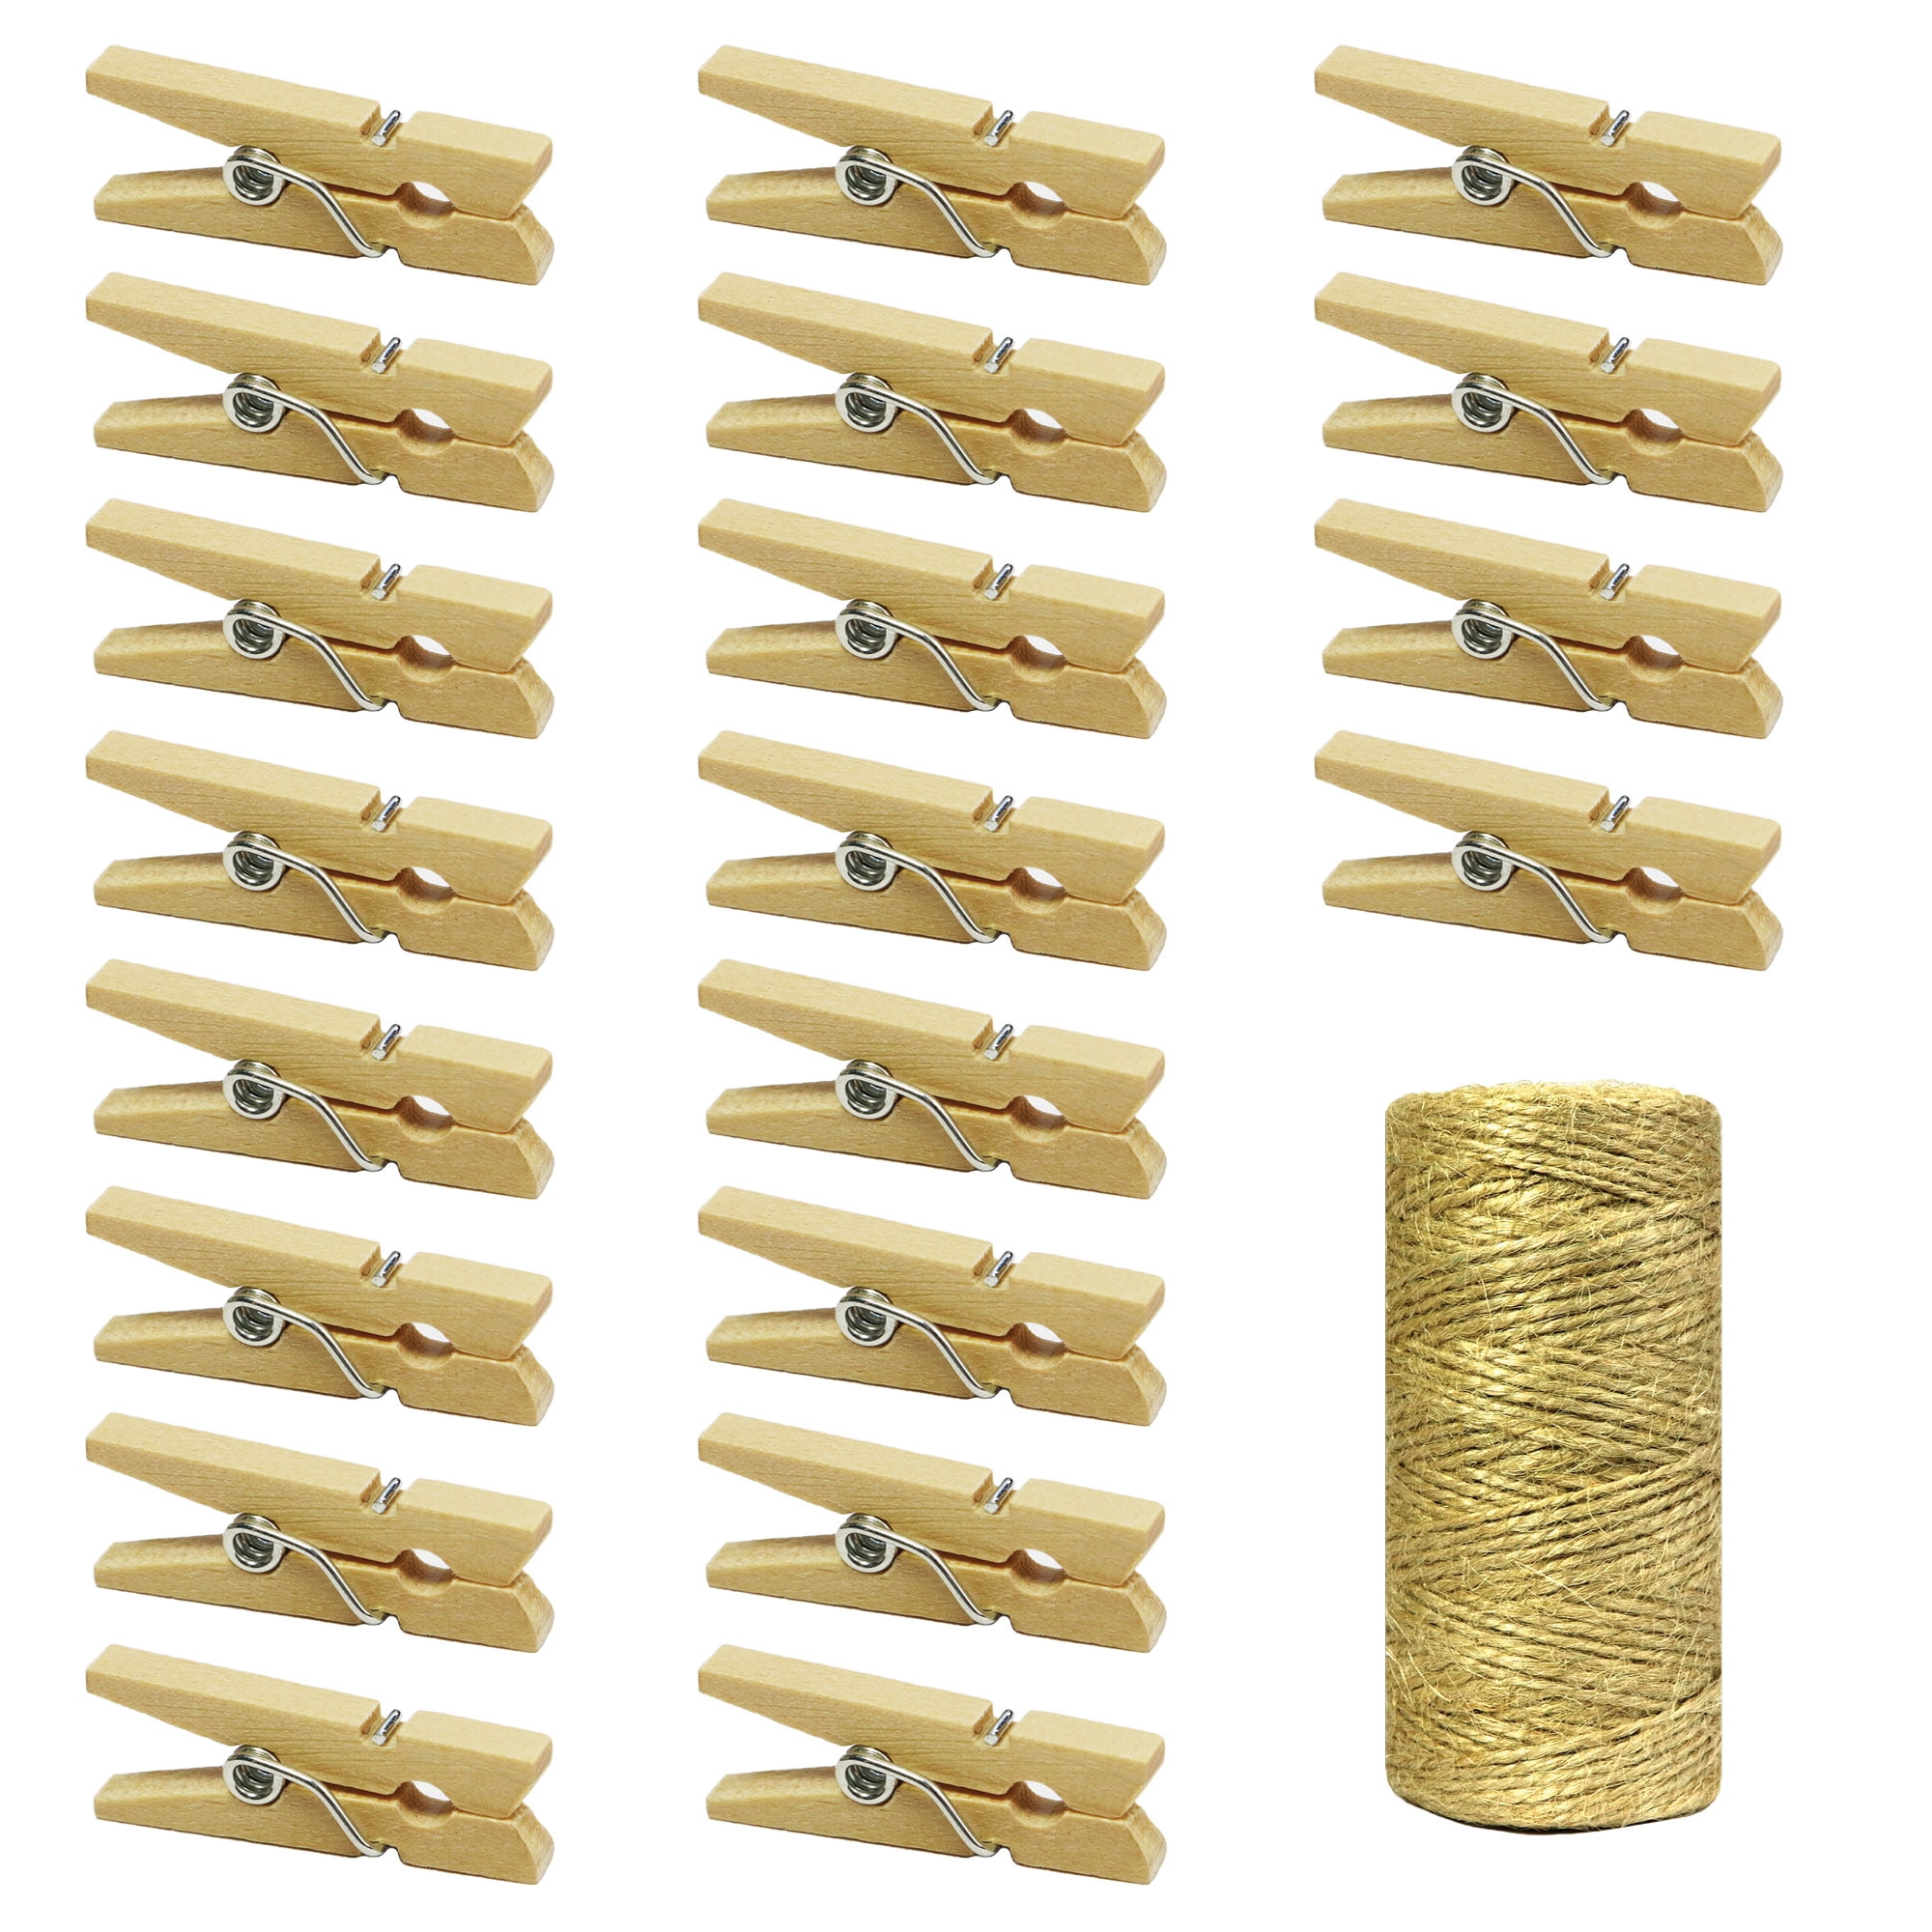 HSTECH 100 Pcs Yellow Mini Natural Wooden Clothespins and 82 Ft Jute Twine,  Baby Clothes Pins, 3.5 cm Craft Photo Clips for Home School Arts Crafts